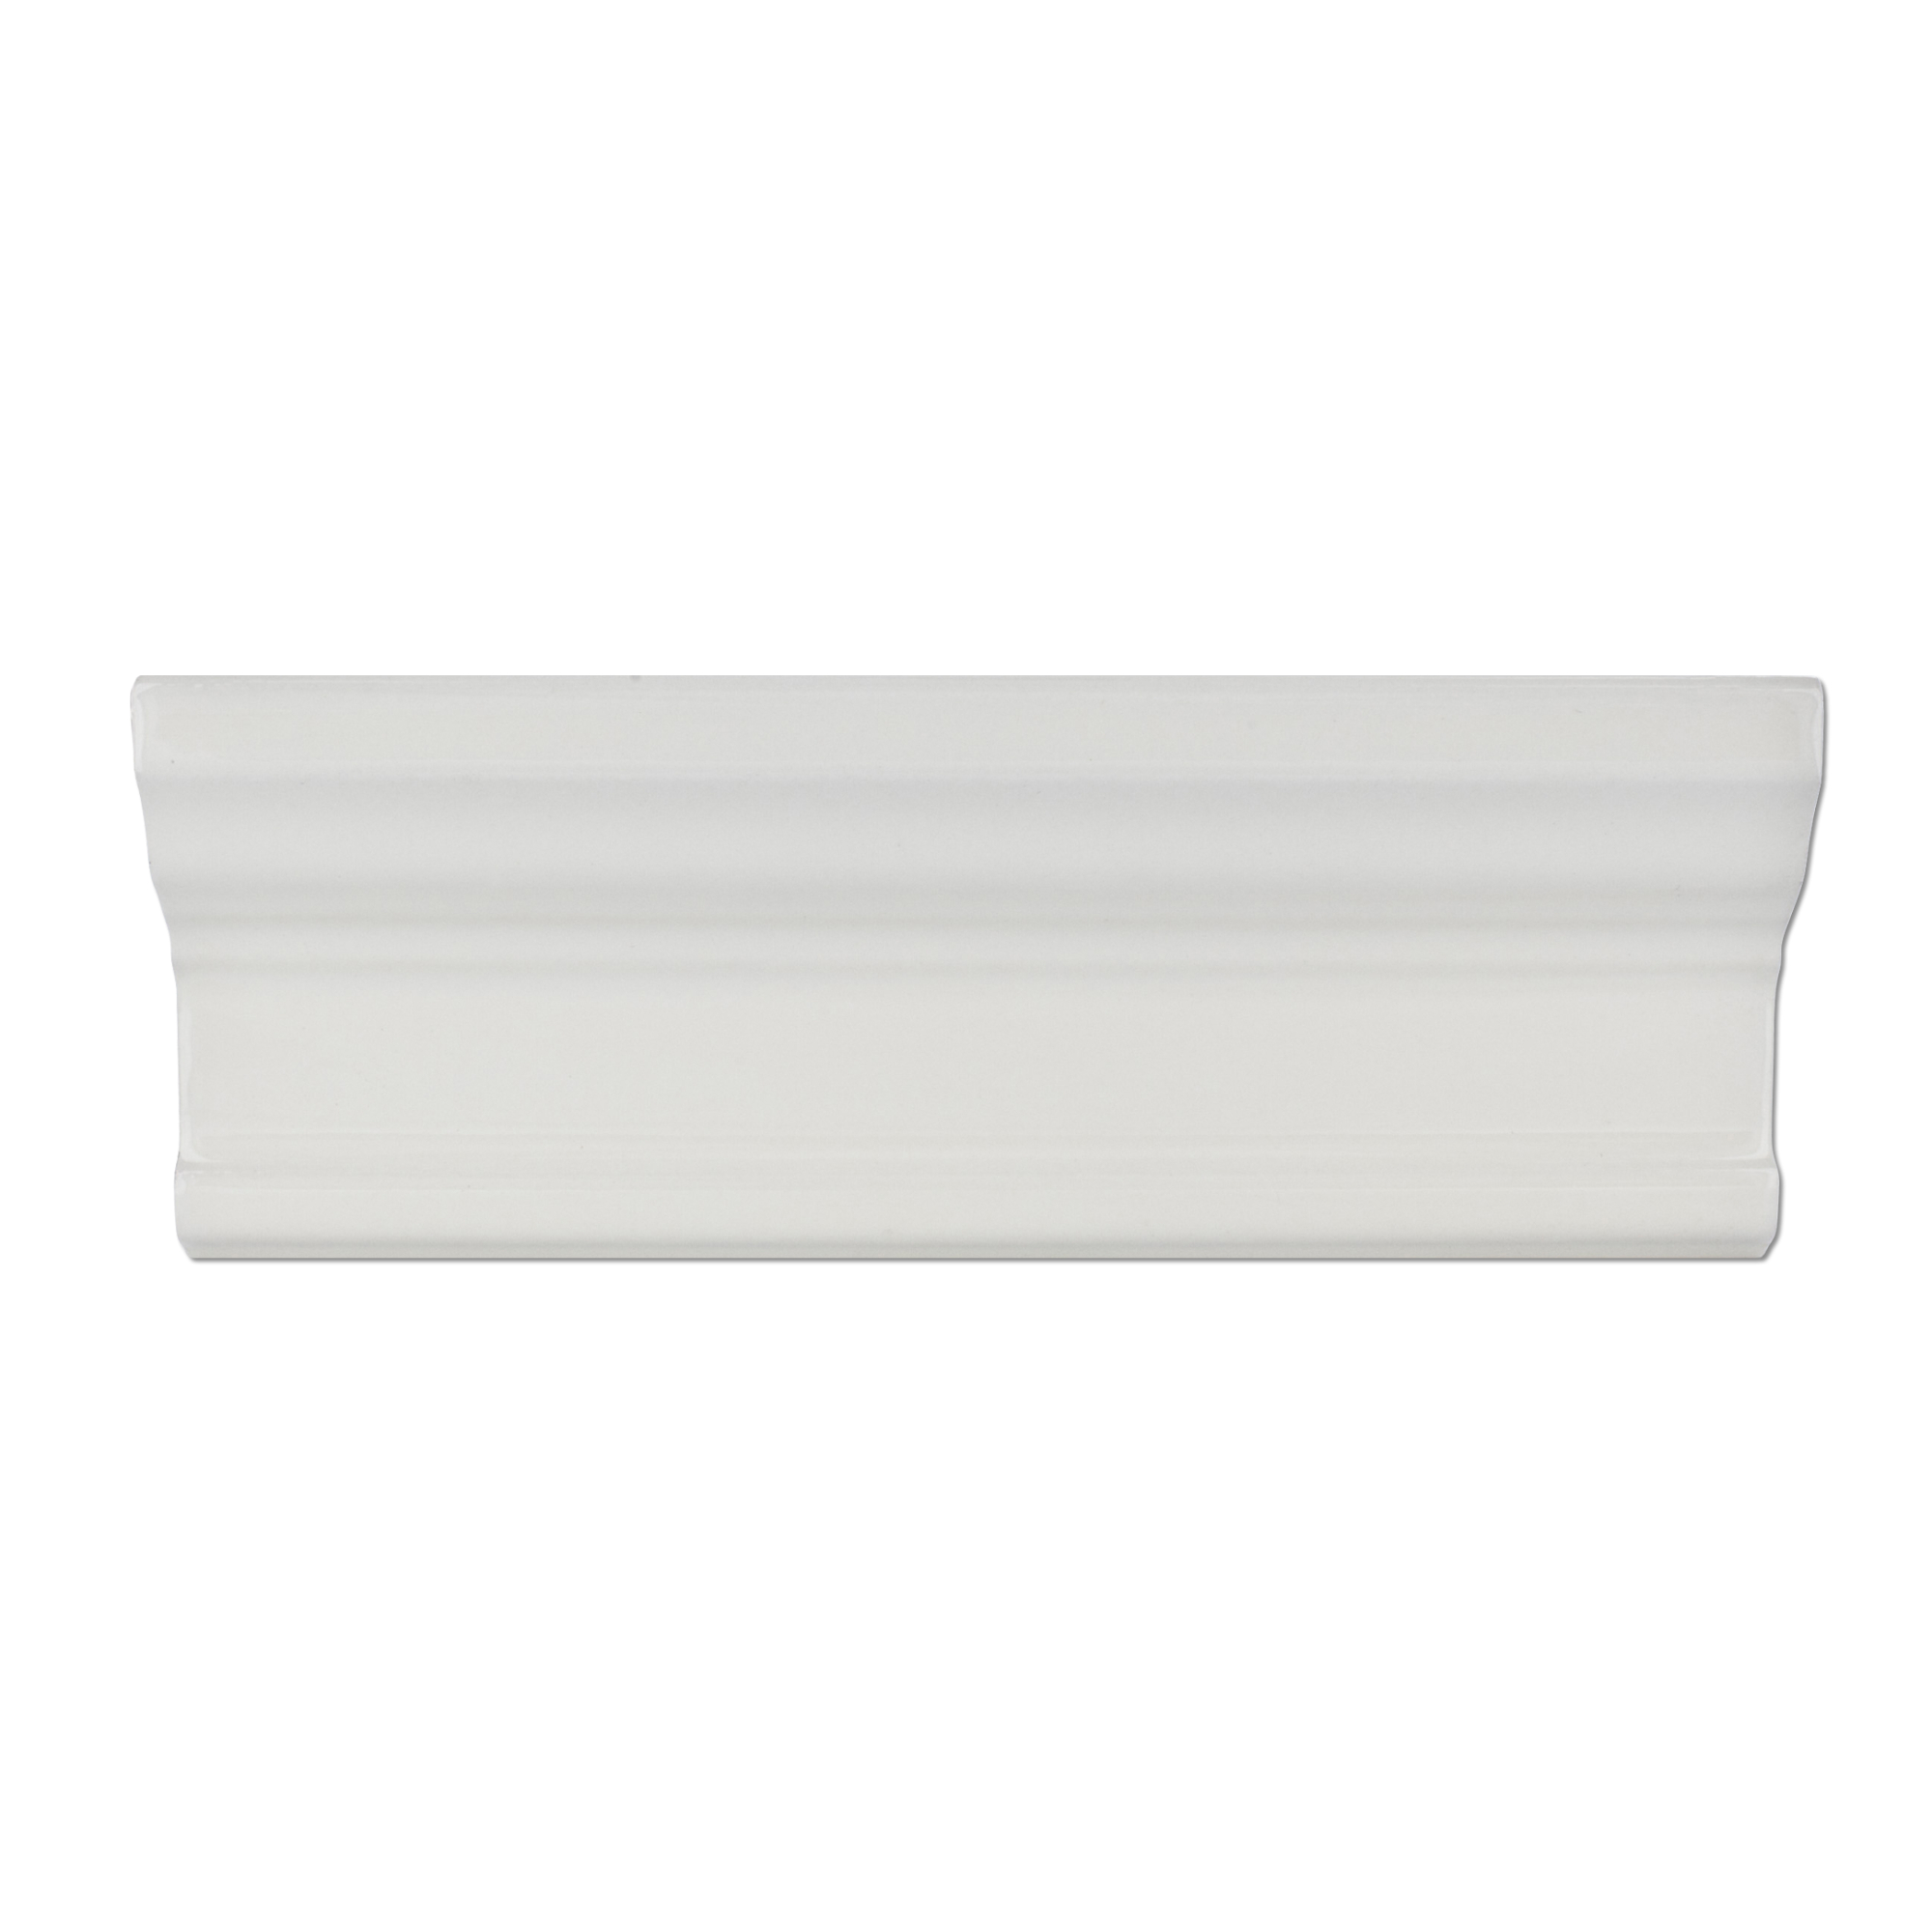 Imperial Ivory Gls Cornice